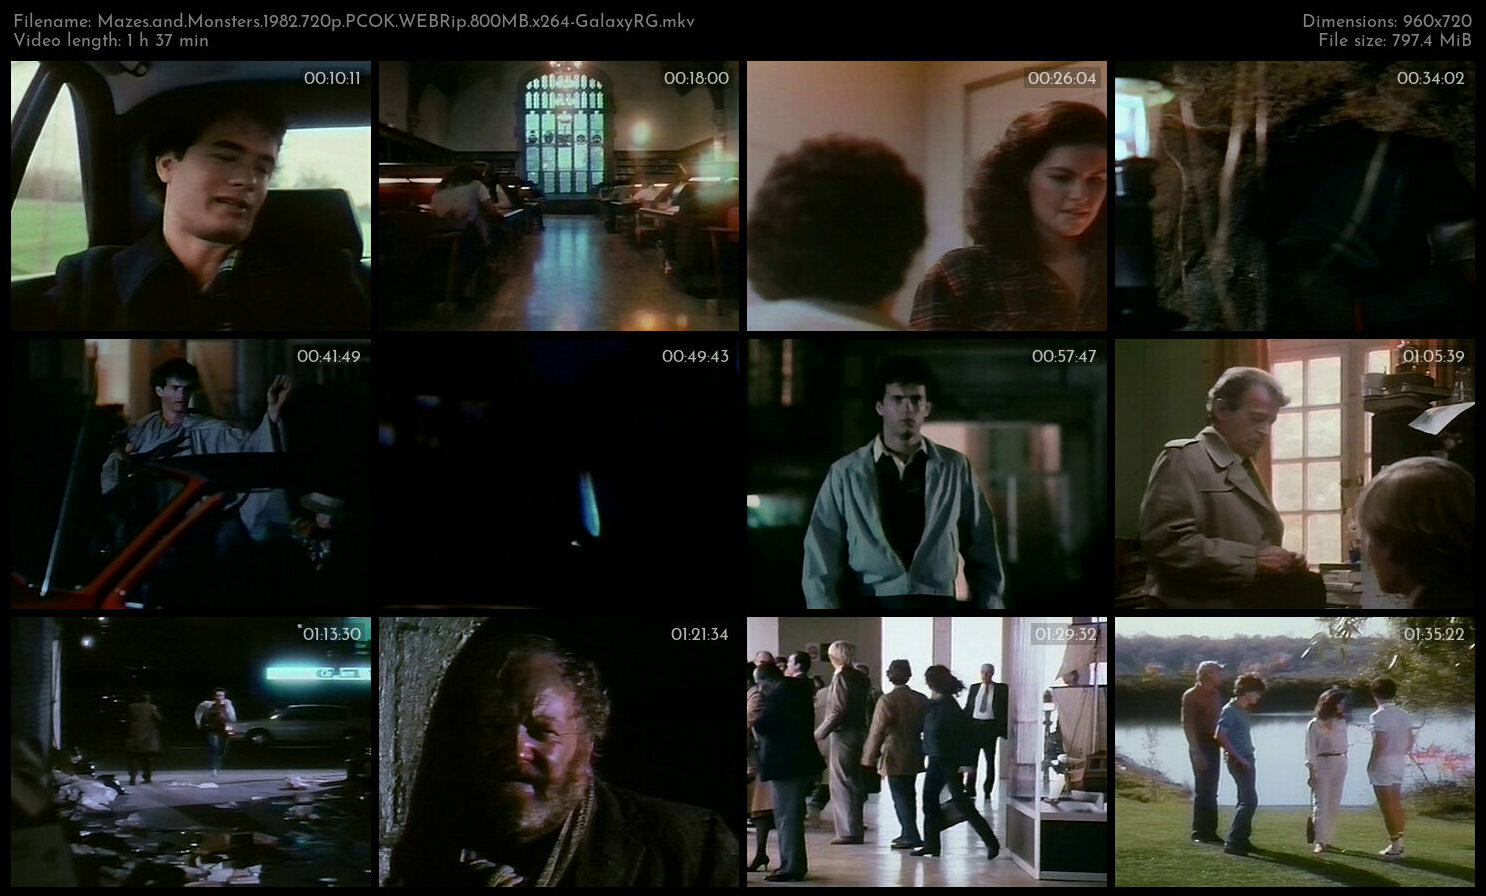 Mazes and Monsters 1982 720p PCOK WEBRip 800MB x264 GalaxyRG